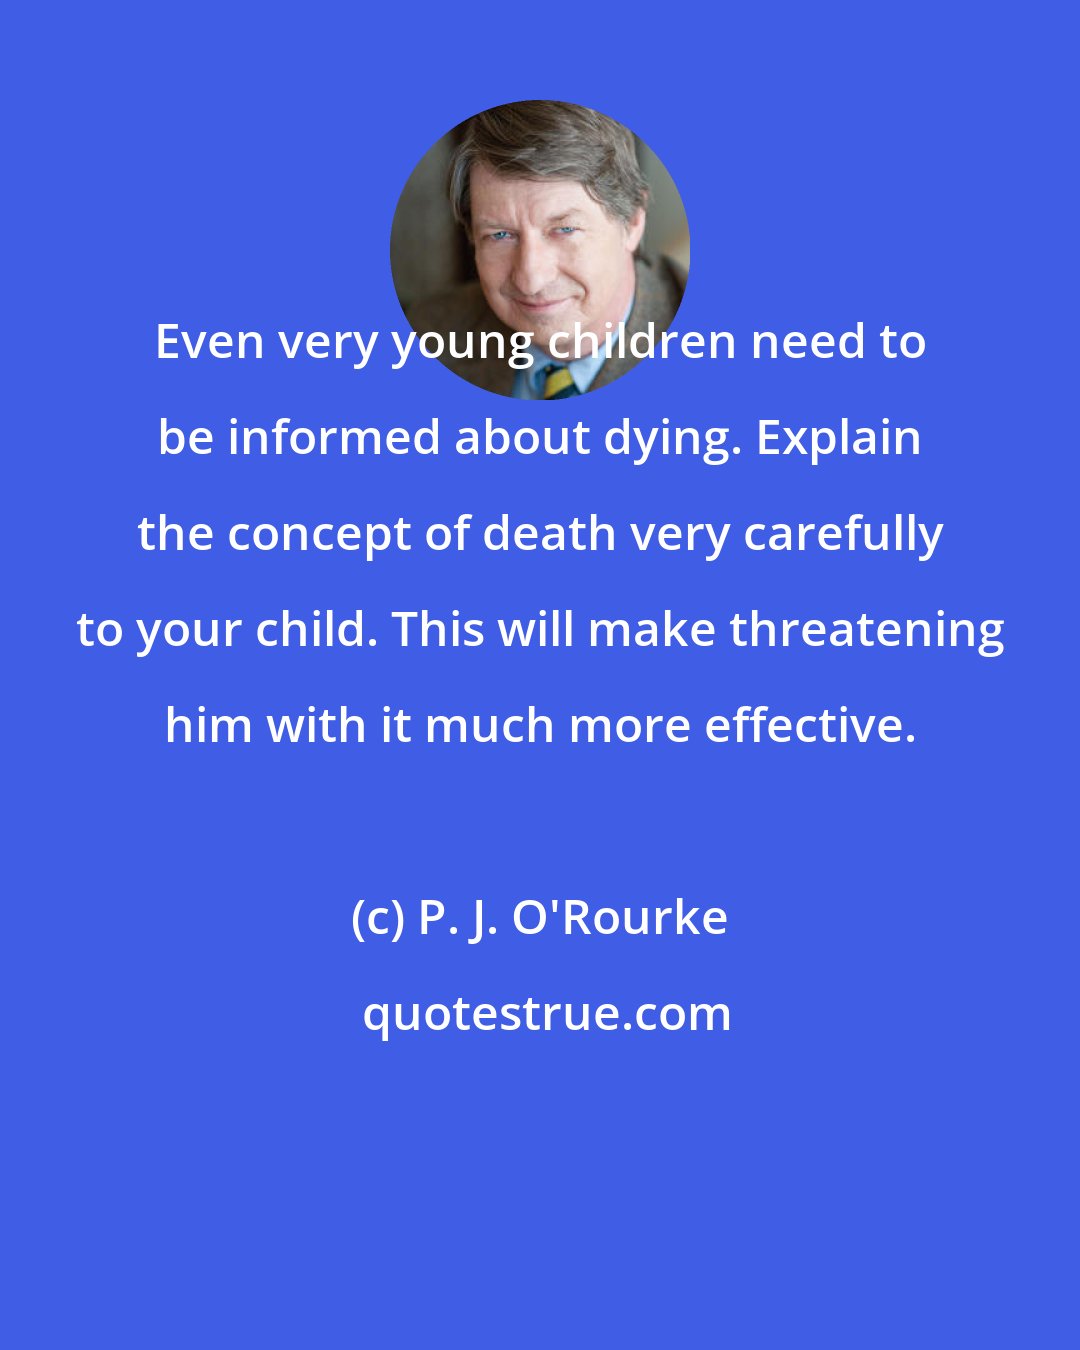 P. J. O'Rourke: Even very young children need to be informed about dying. Explain the concept of death very carefully to your child. This will make threatening him with it much more effective.